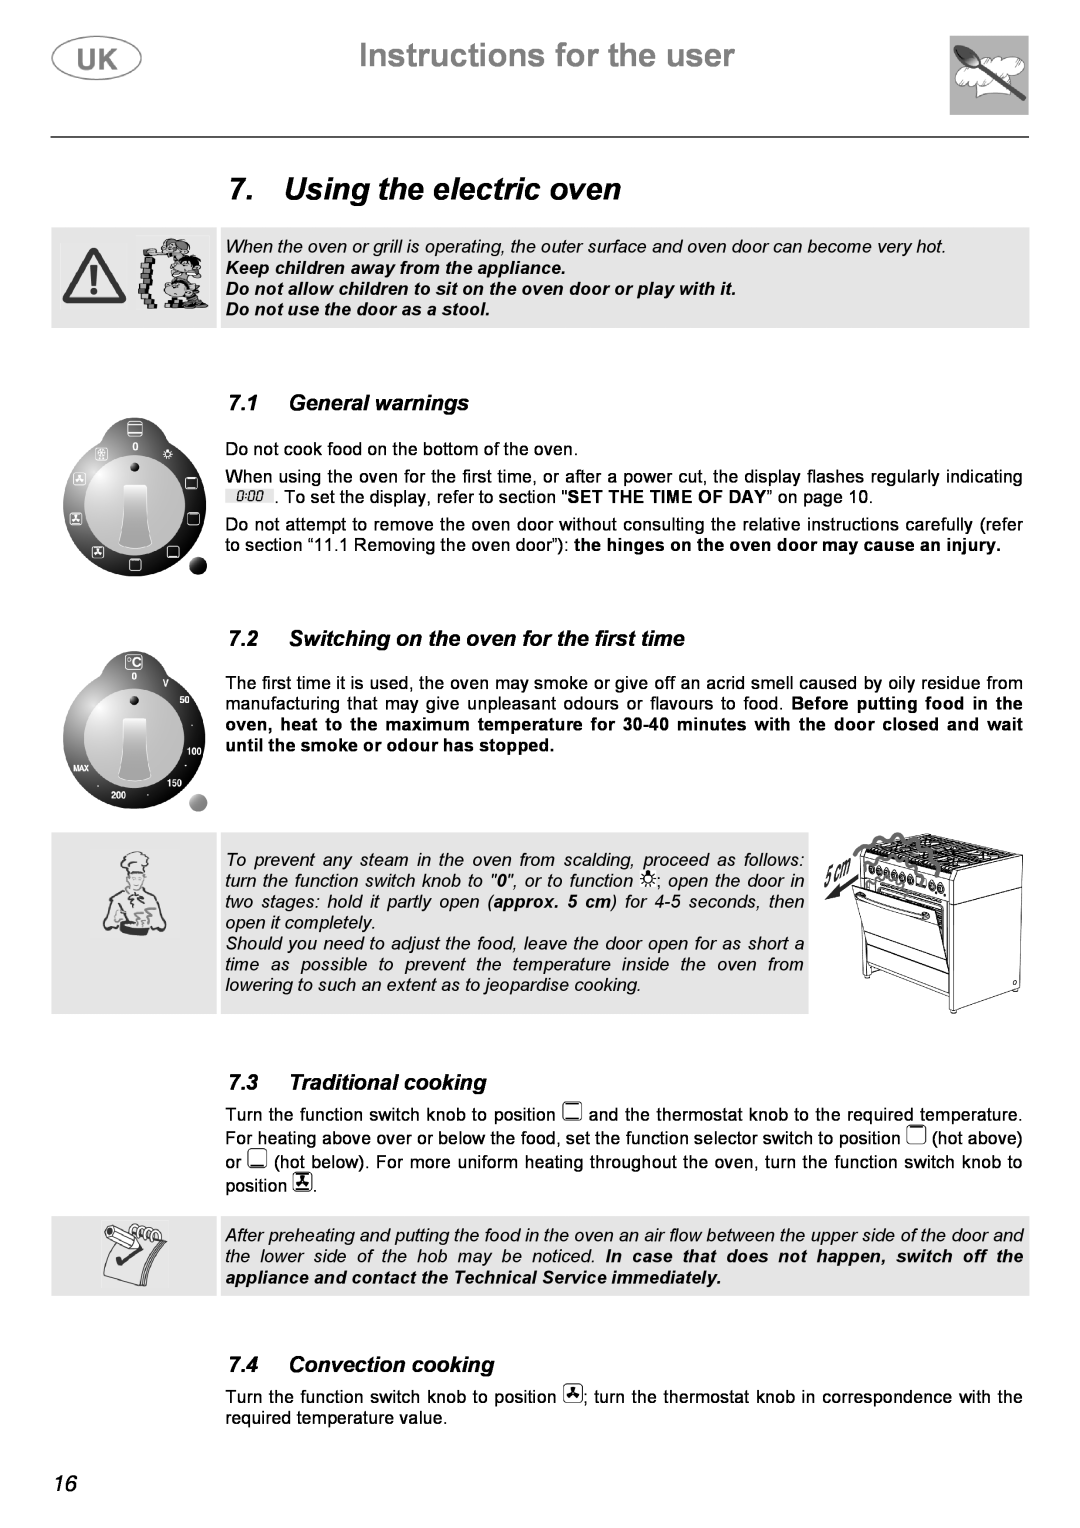 AEG C41022G manual Using the electric oven, General warnings, Switching on the oven for the first time, Traditional cooking 